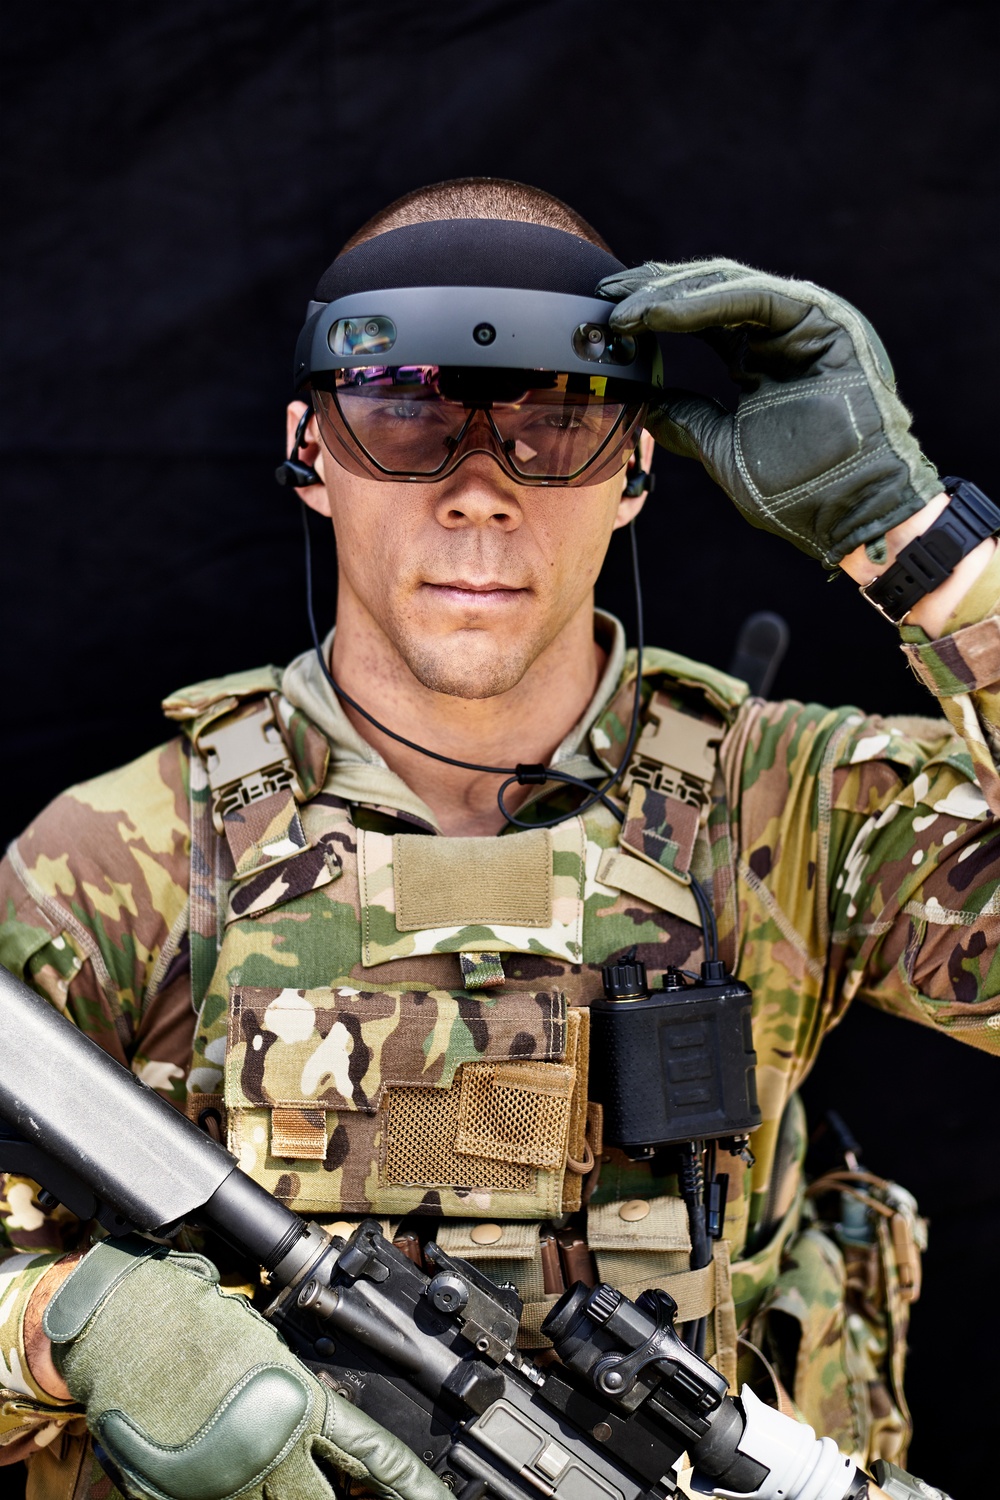 Soldiers’ Feedback Shapes New Technology